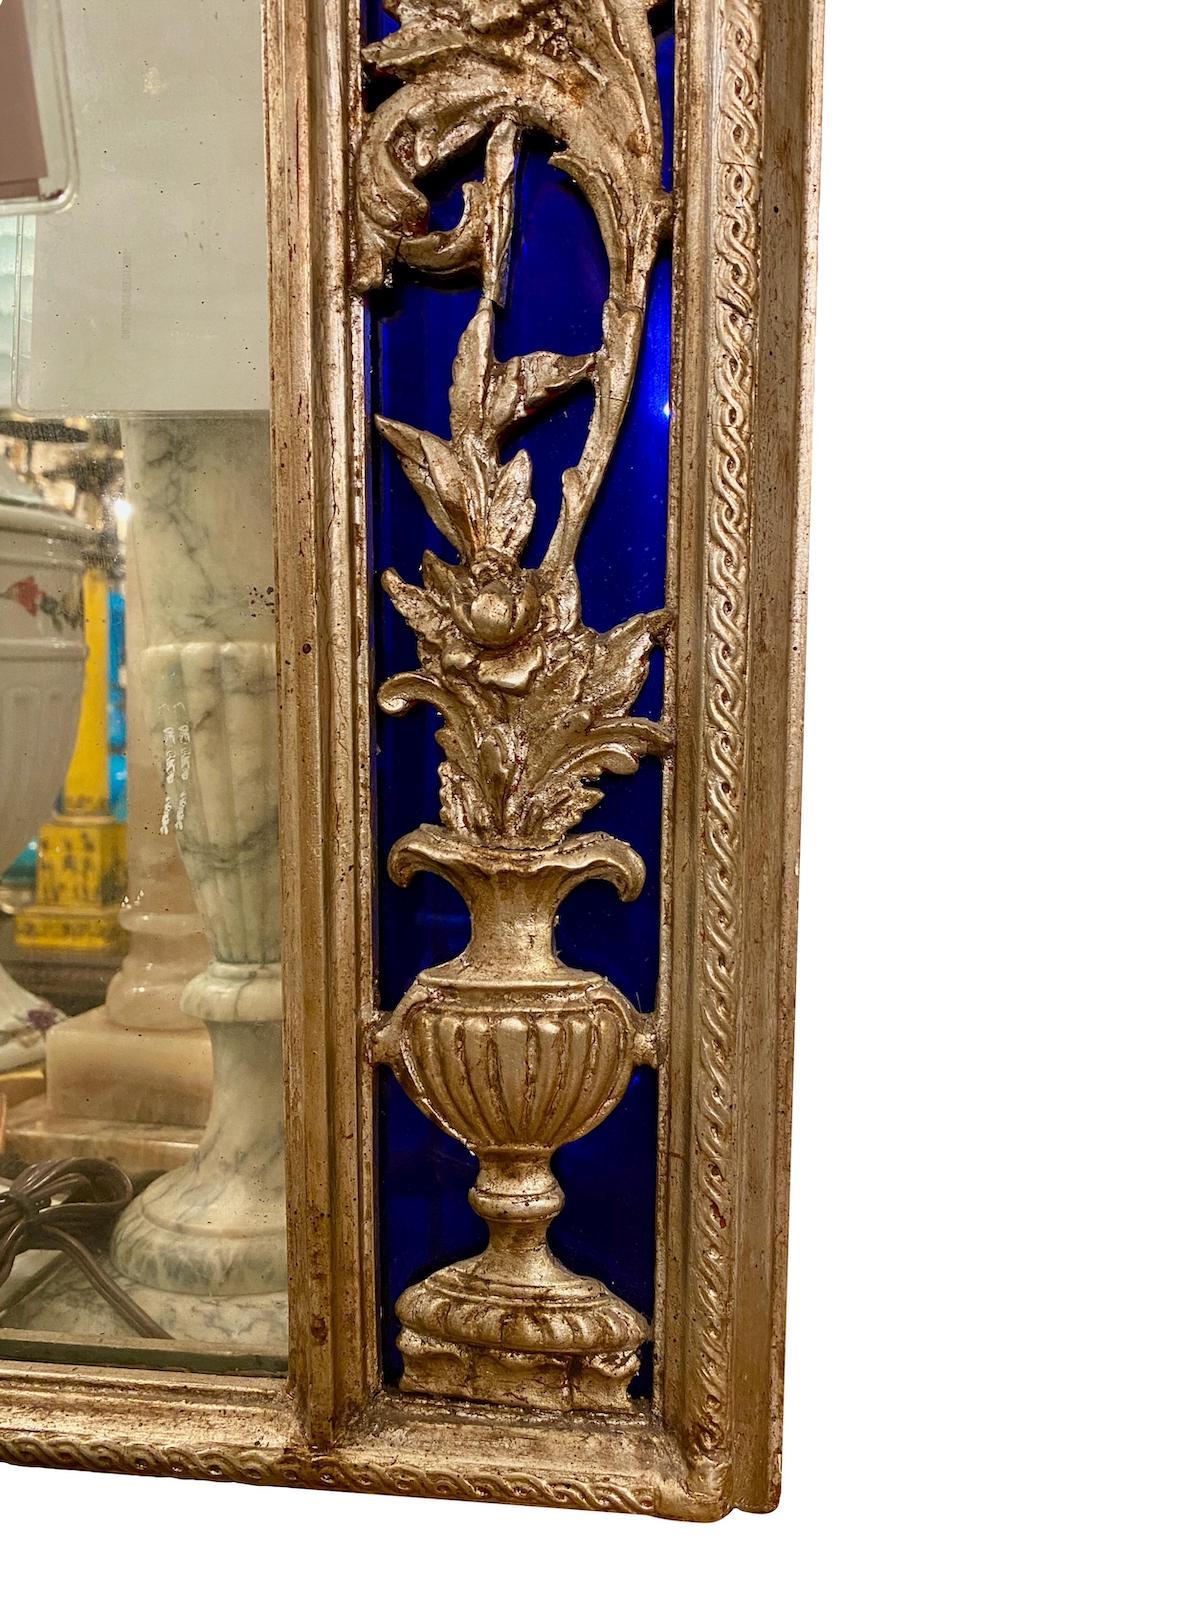 A circa 1930s French neoclassic style silver plated mirror with foliage detail and cobalt blue mirror frame.

Measurements: 
Height 43.5